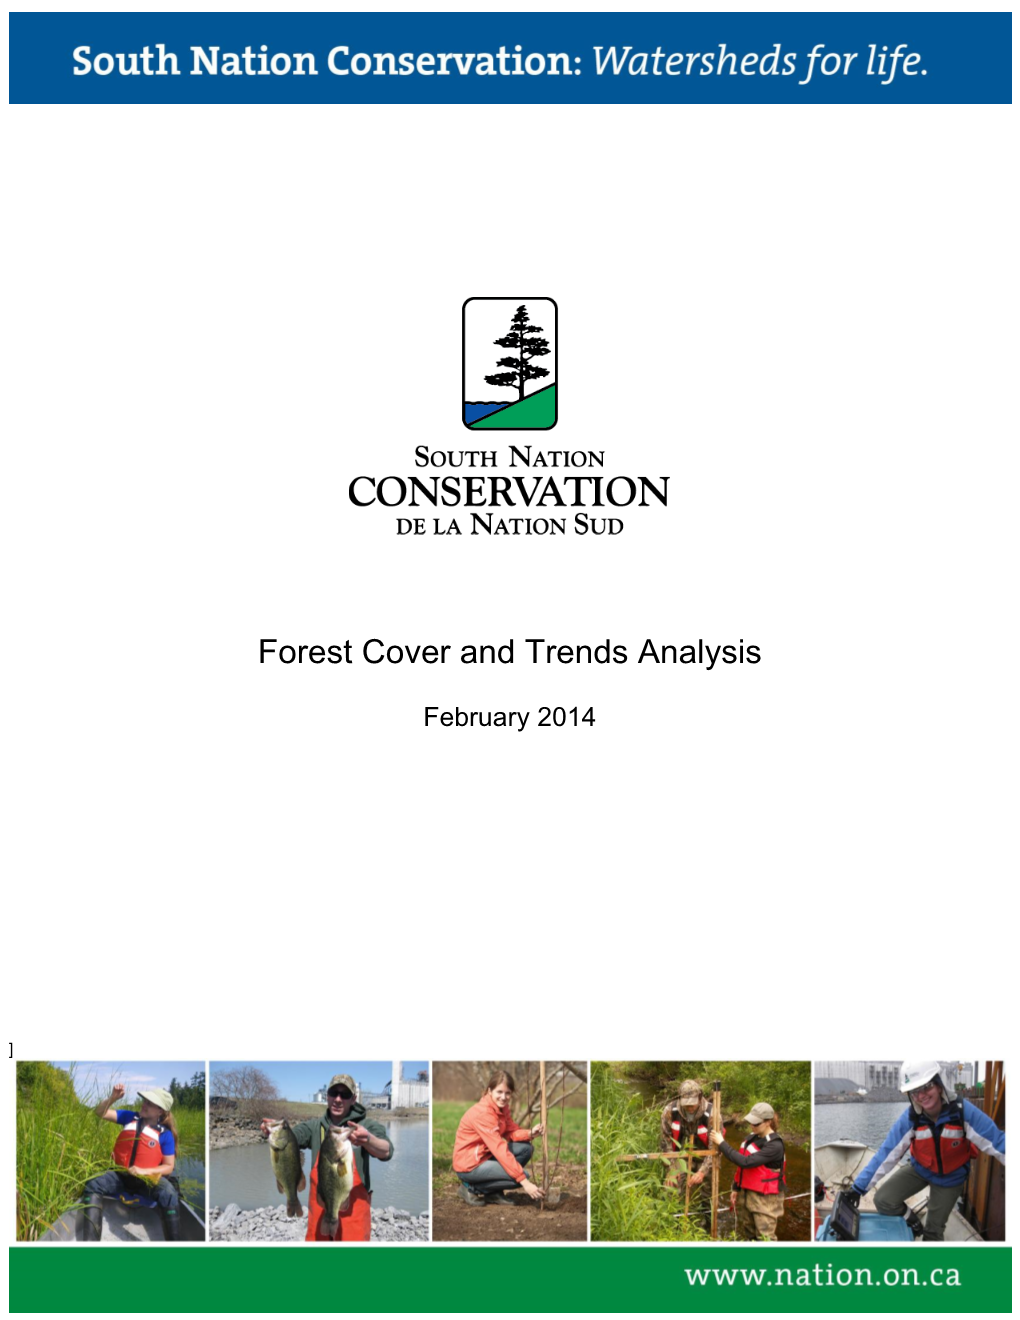 Forest Cover and Trends Analysis